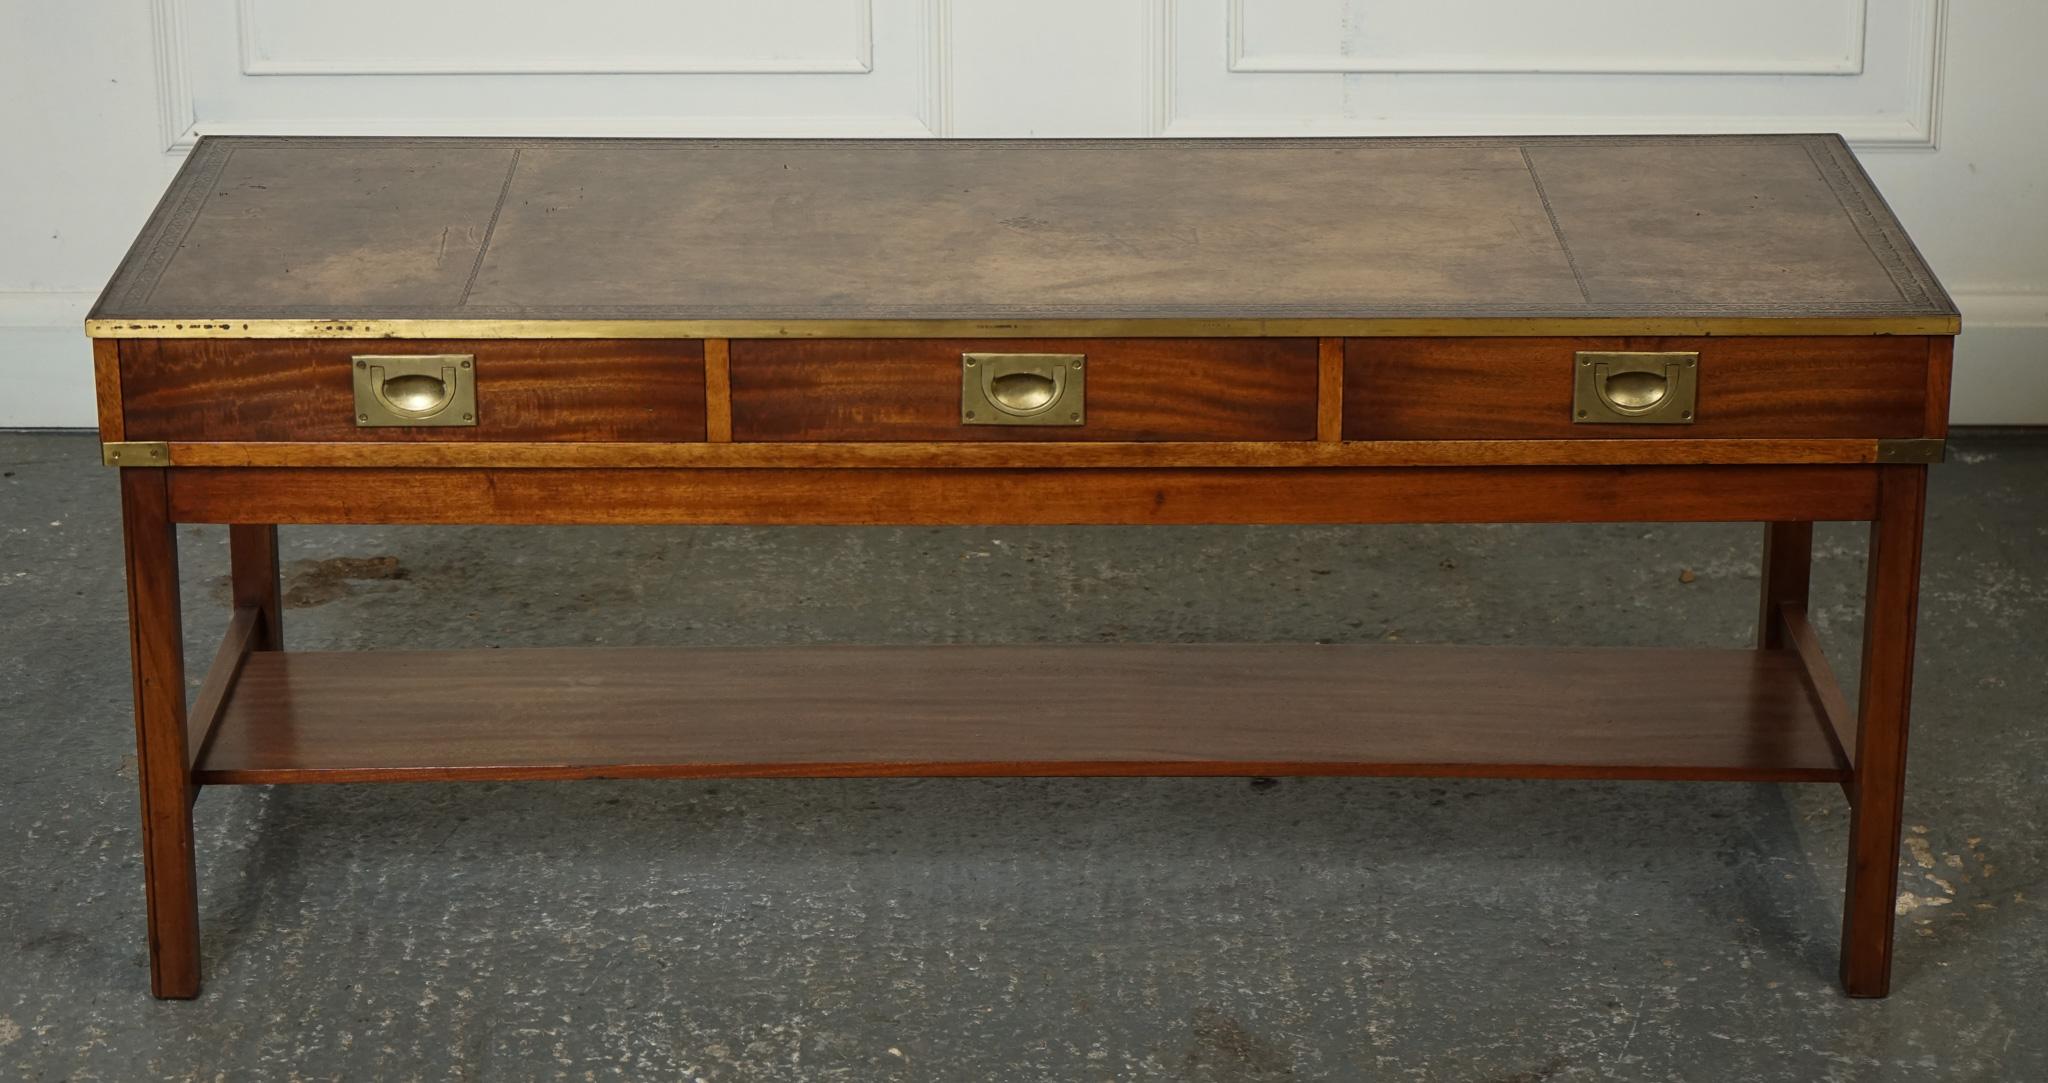 British VINTAGE MILITARY CAMPAiGN STYLE COFFEE TABLE W/ BROWN AGED LEATHER 3 DRAWERS J1 For Sale